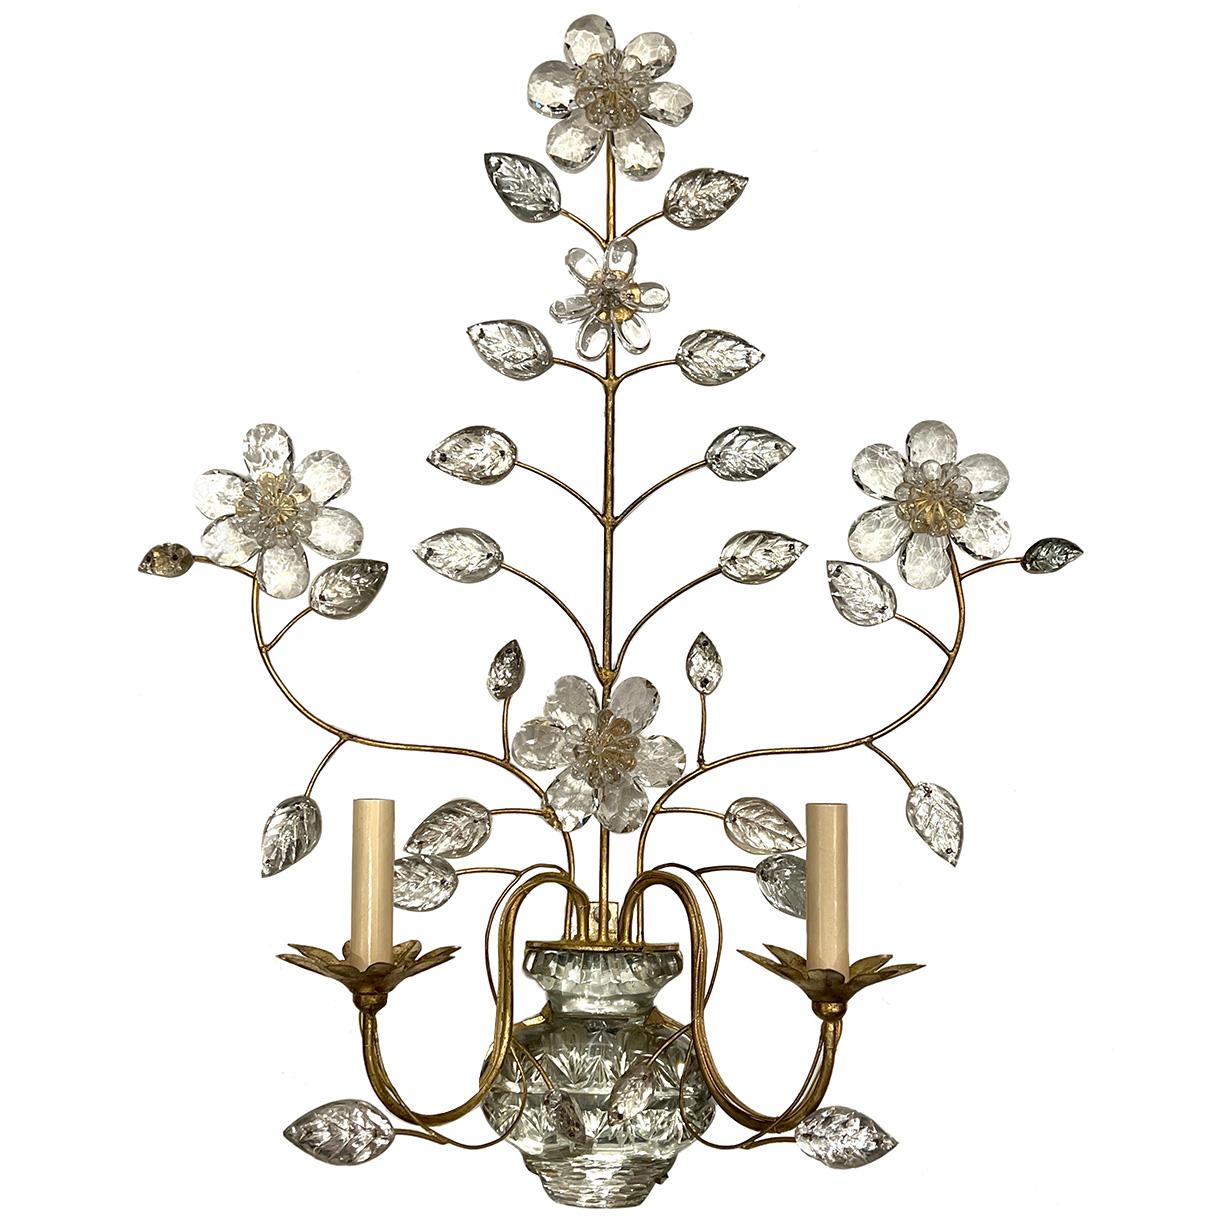 Pair of French circa 1940's gilt metal sconces with molded glass leaves and crystal flower, original finish and patina.

Measurements:
Height: 29